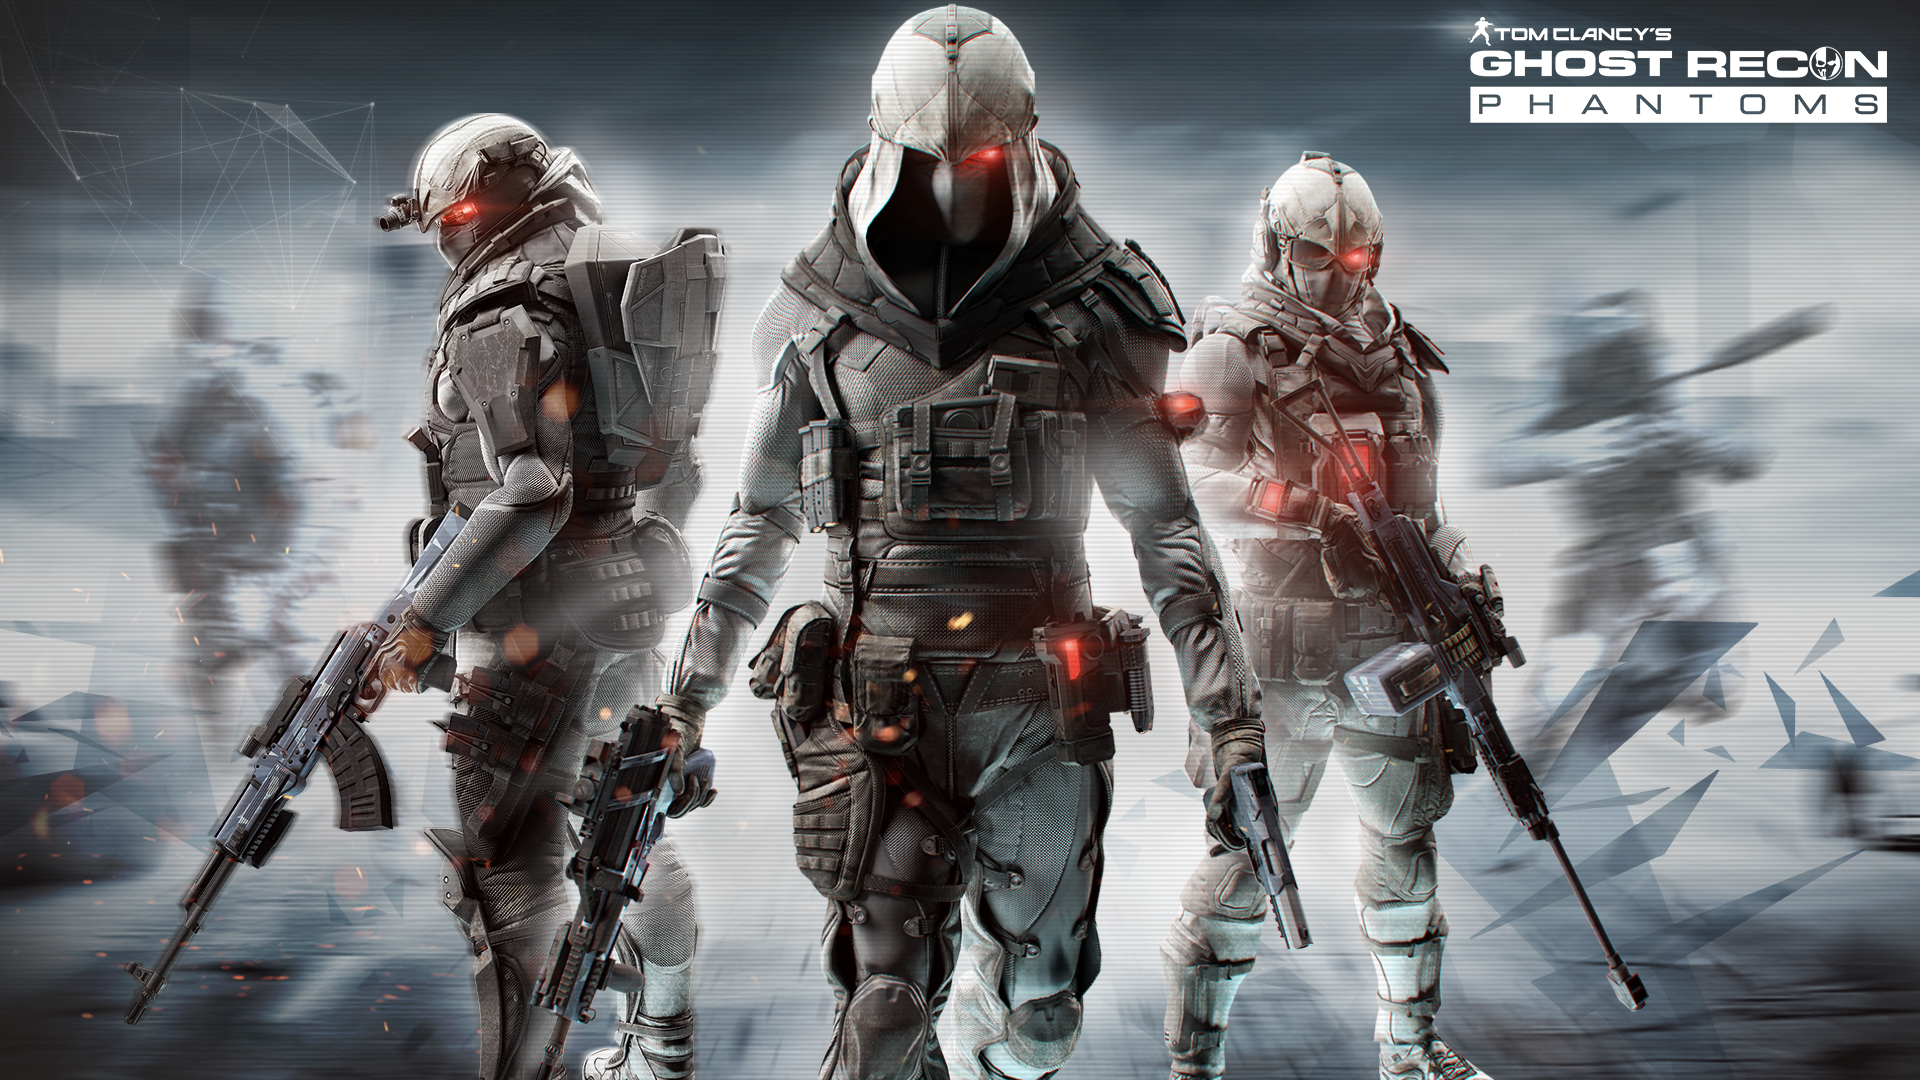 Images of Tom Clancy's Ghost Recon Phantoms | 1920x1080